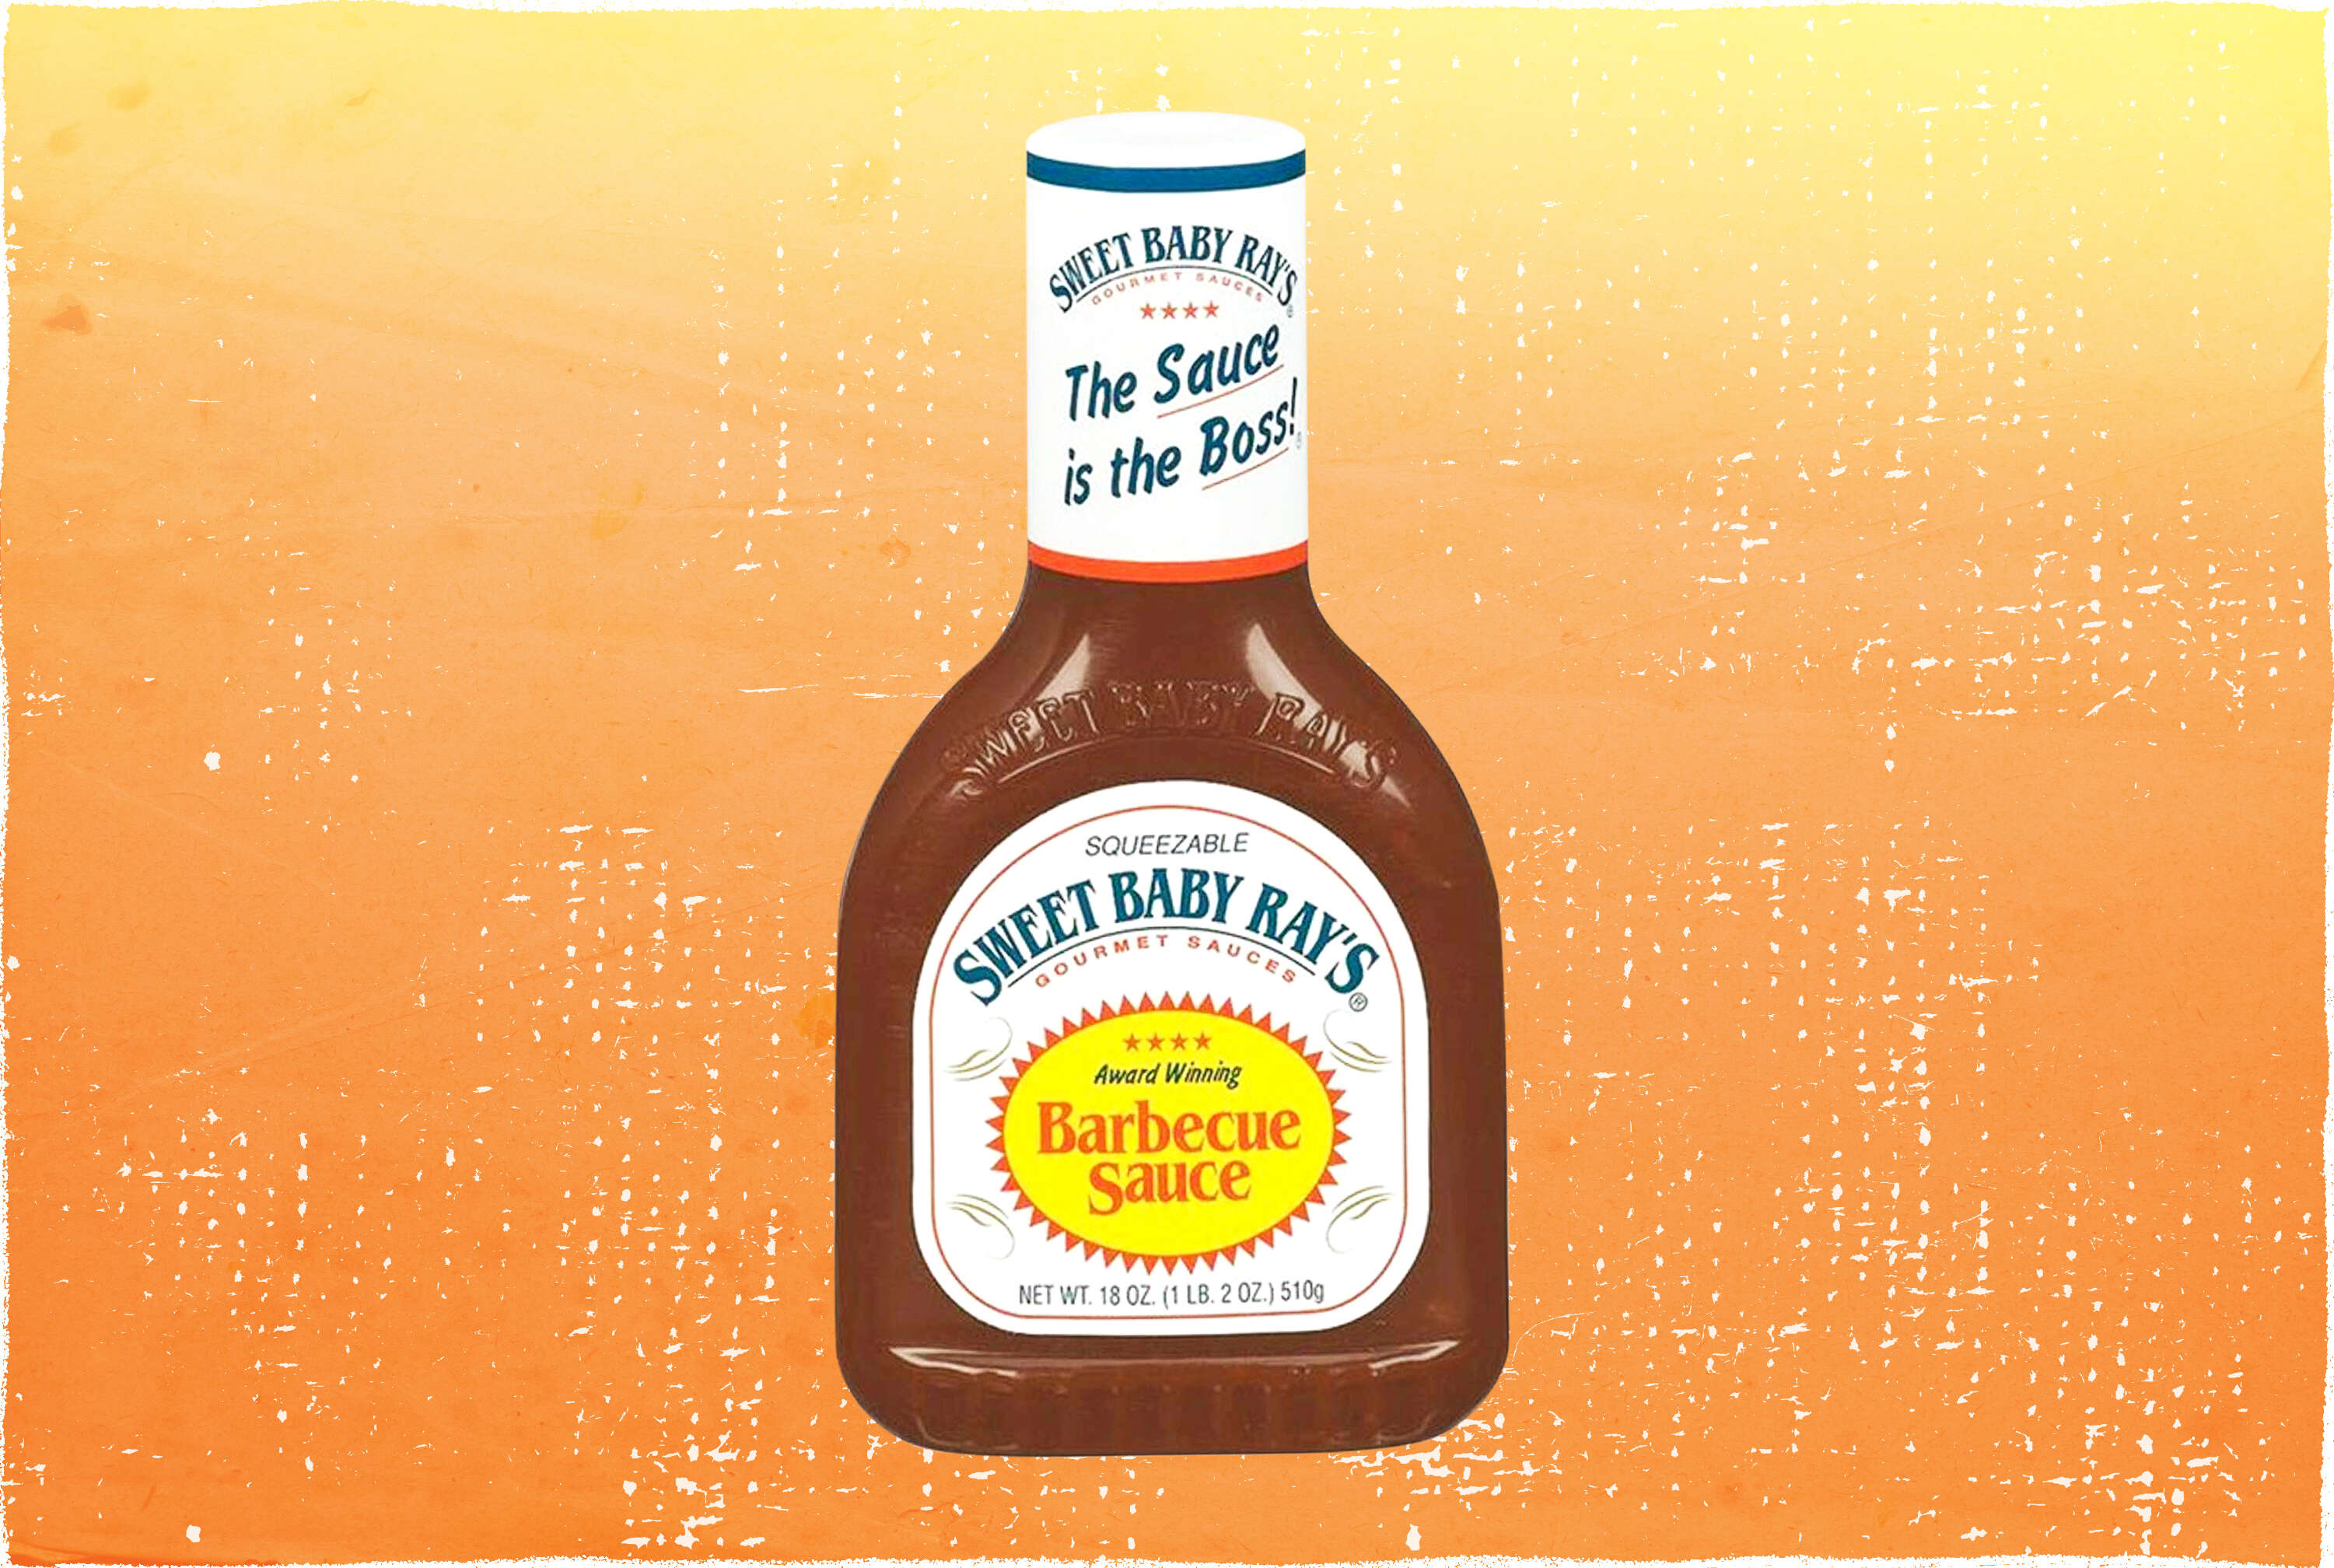 Sweet Baby Ray's barbecue sauce